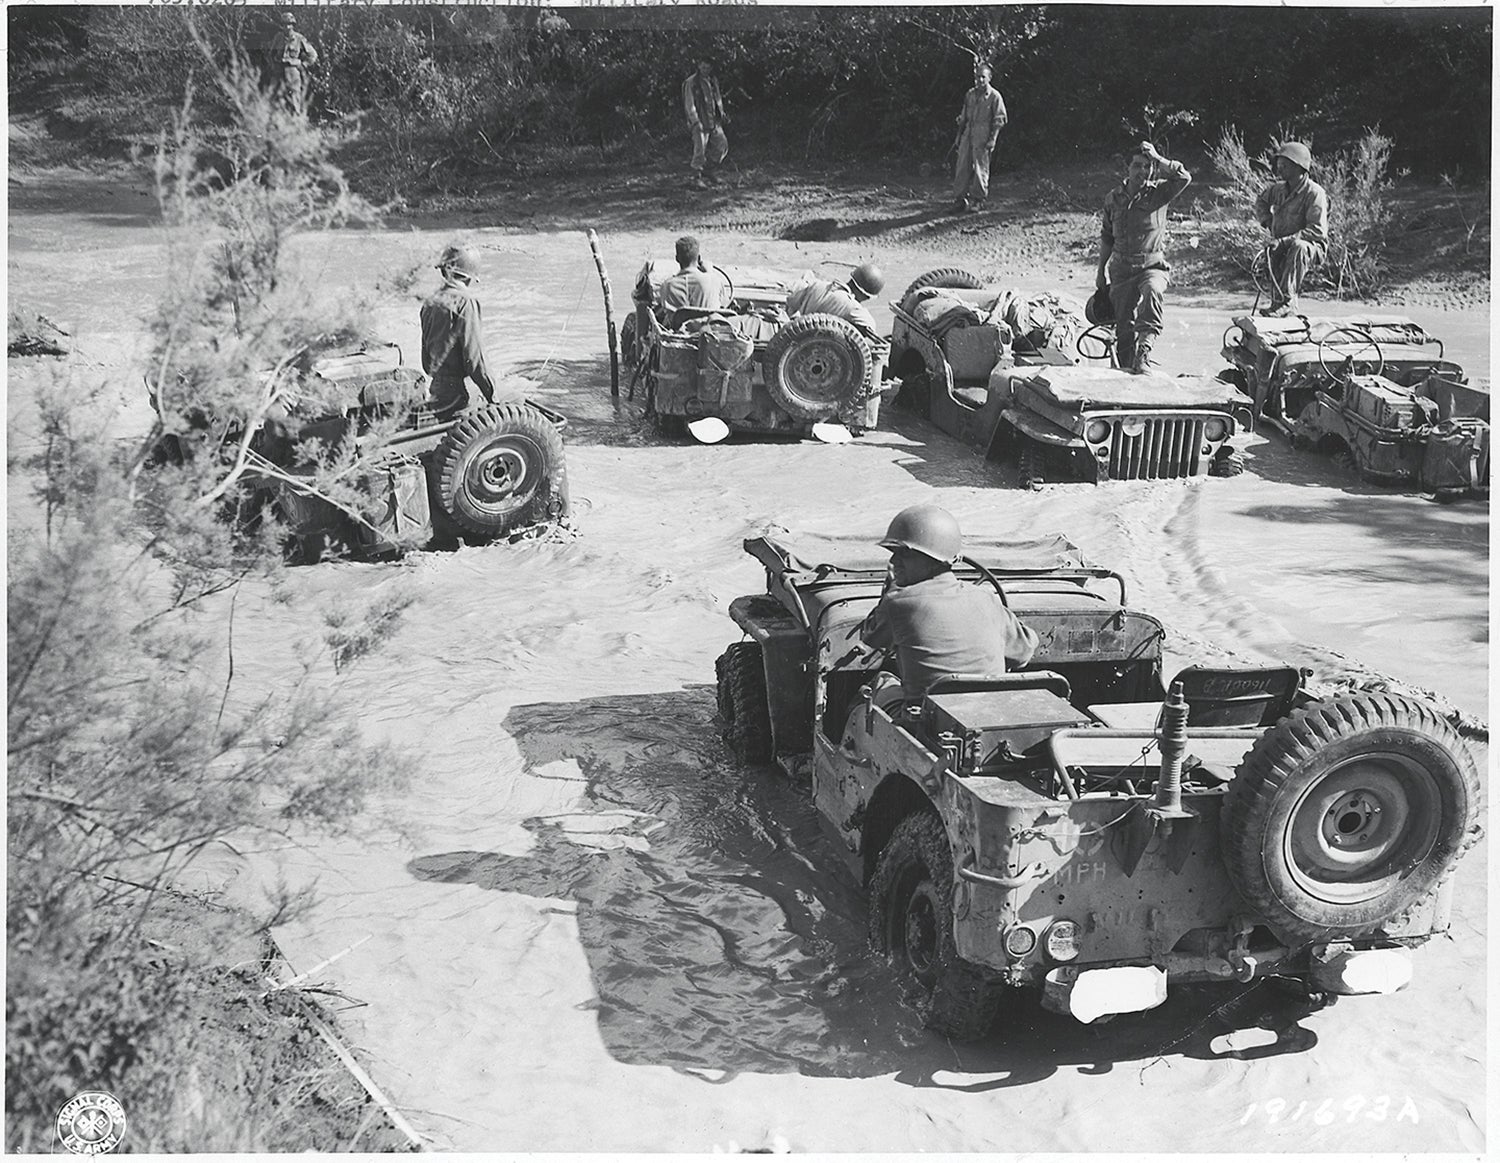 U.S. Fifth Army jeeps cross a rain-swollen stream in Italy during World War II. (Credit: National Archives)